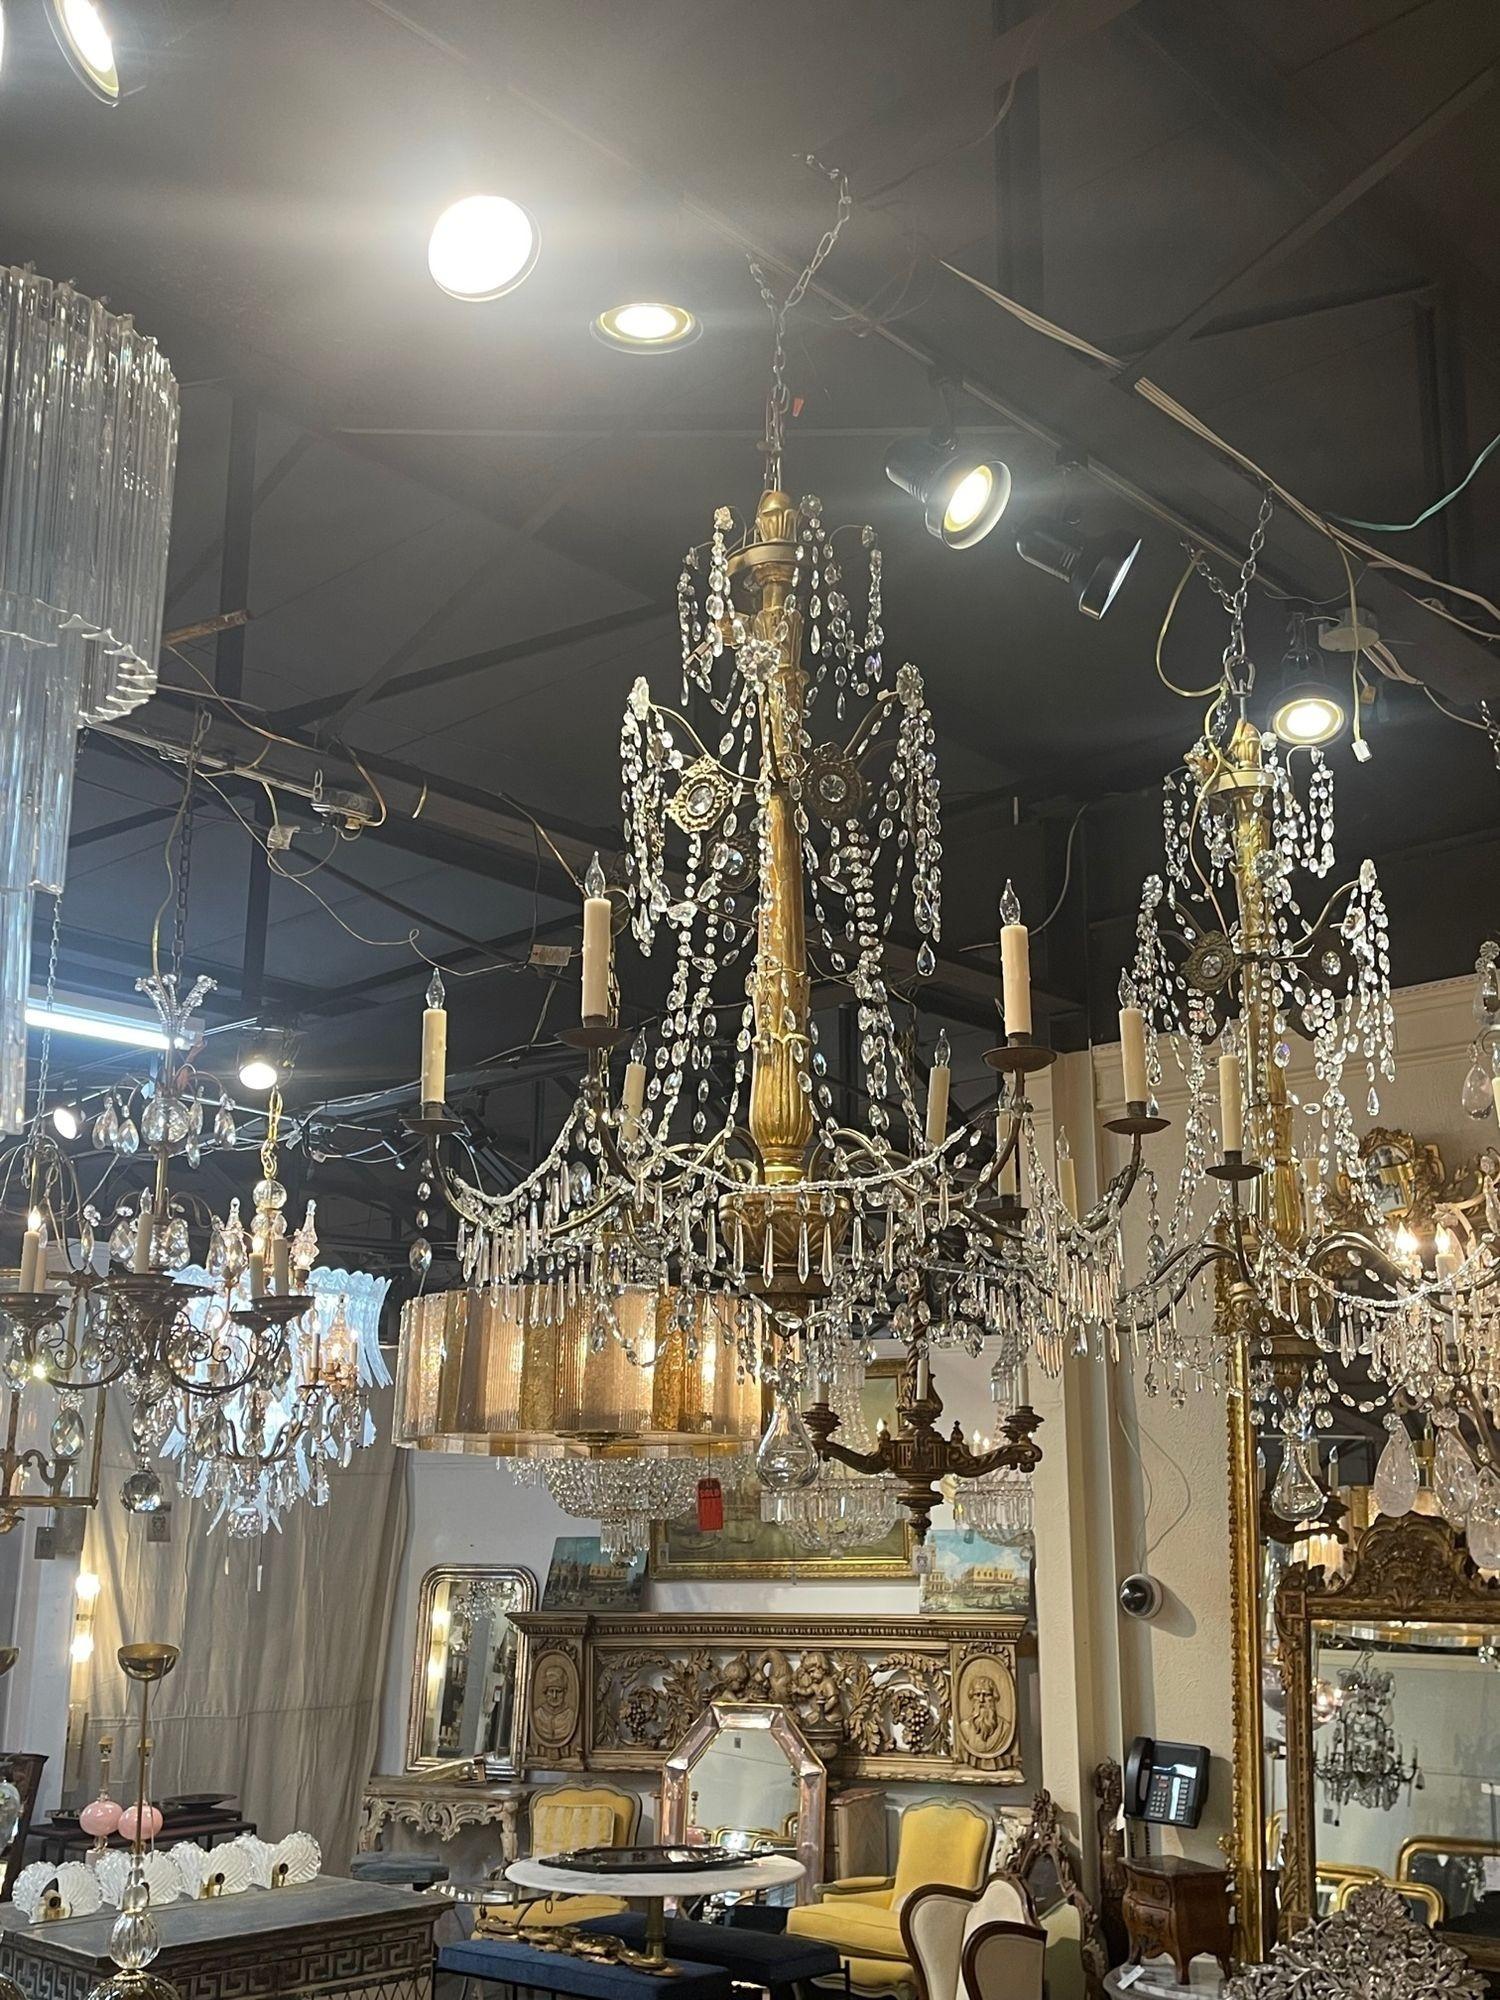 Lovely 18th century Italian giltwood chandeliers from Genoa. These are very elegant with a beautifully carved base and draping crystals. Creates a light and airy feel. So pretty!